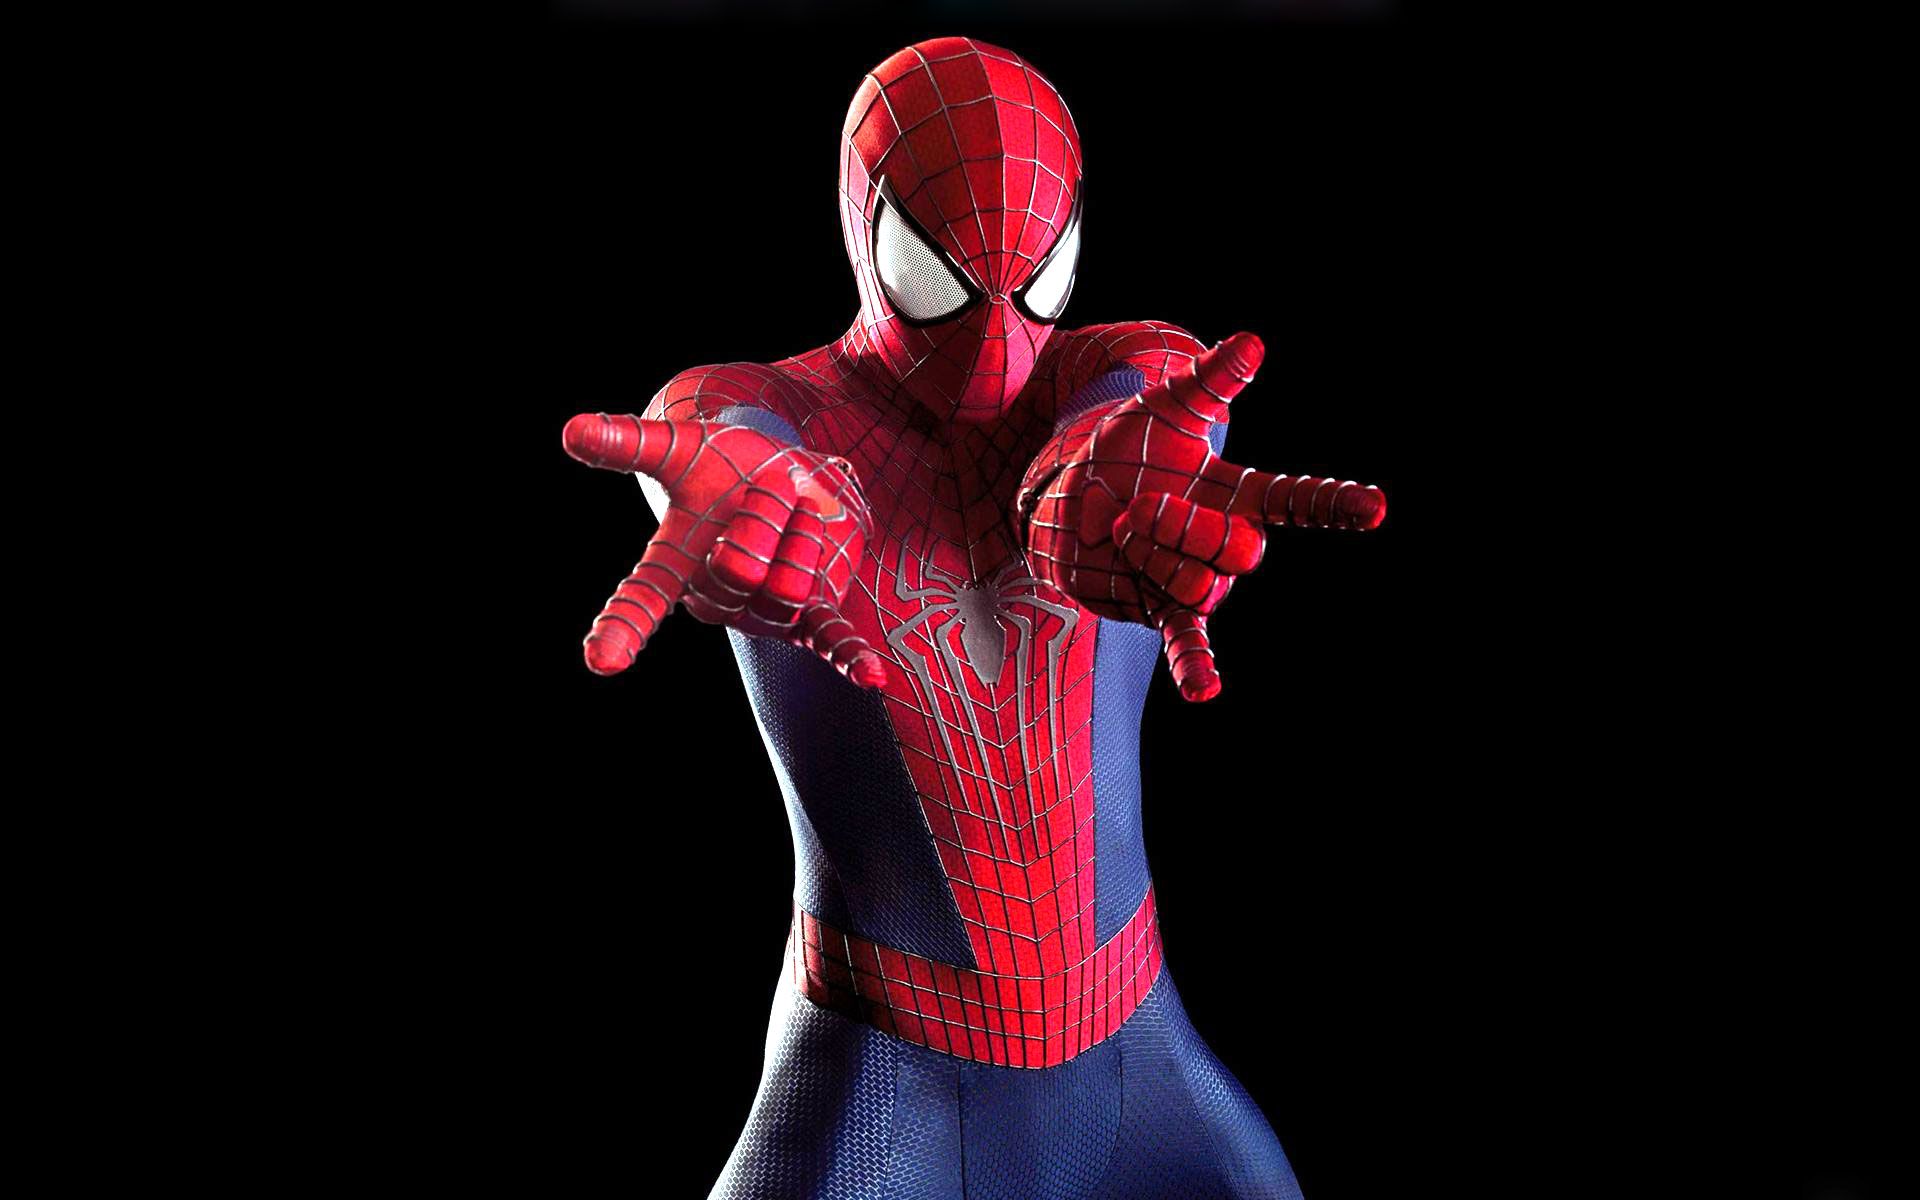 The-Amazing-Spider-Man-2-wallpaper-background-hd-free-amazing-spider-man-2-wallpaper-1920x1080.jpg